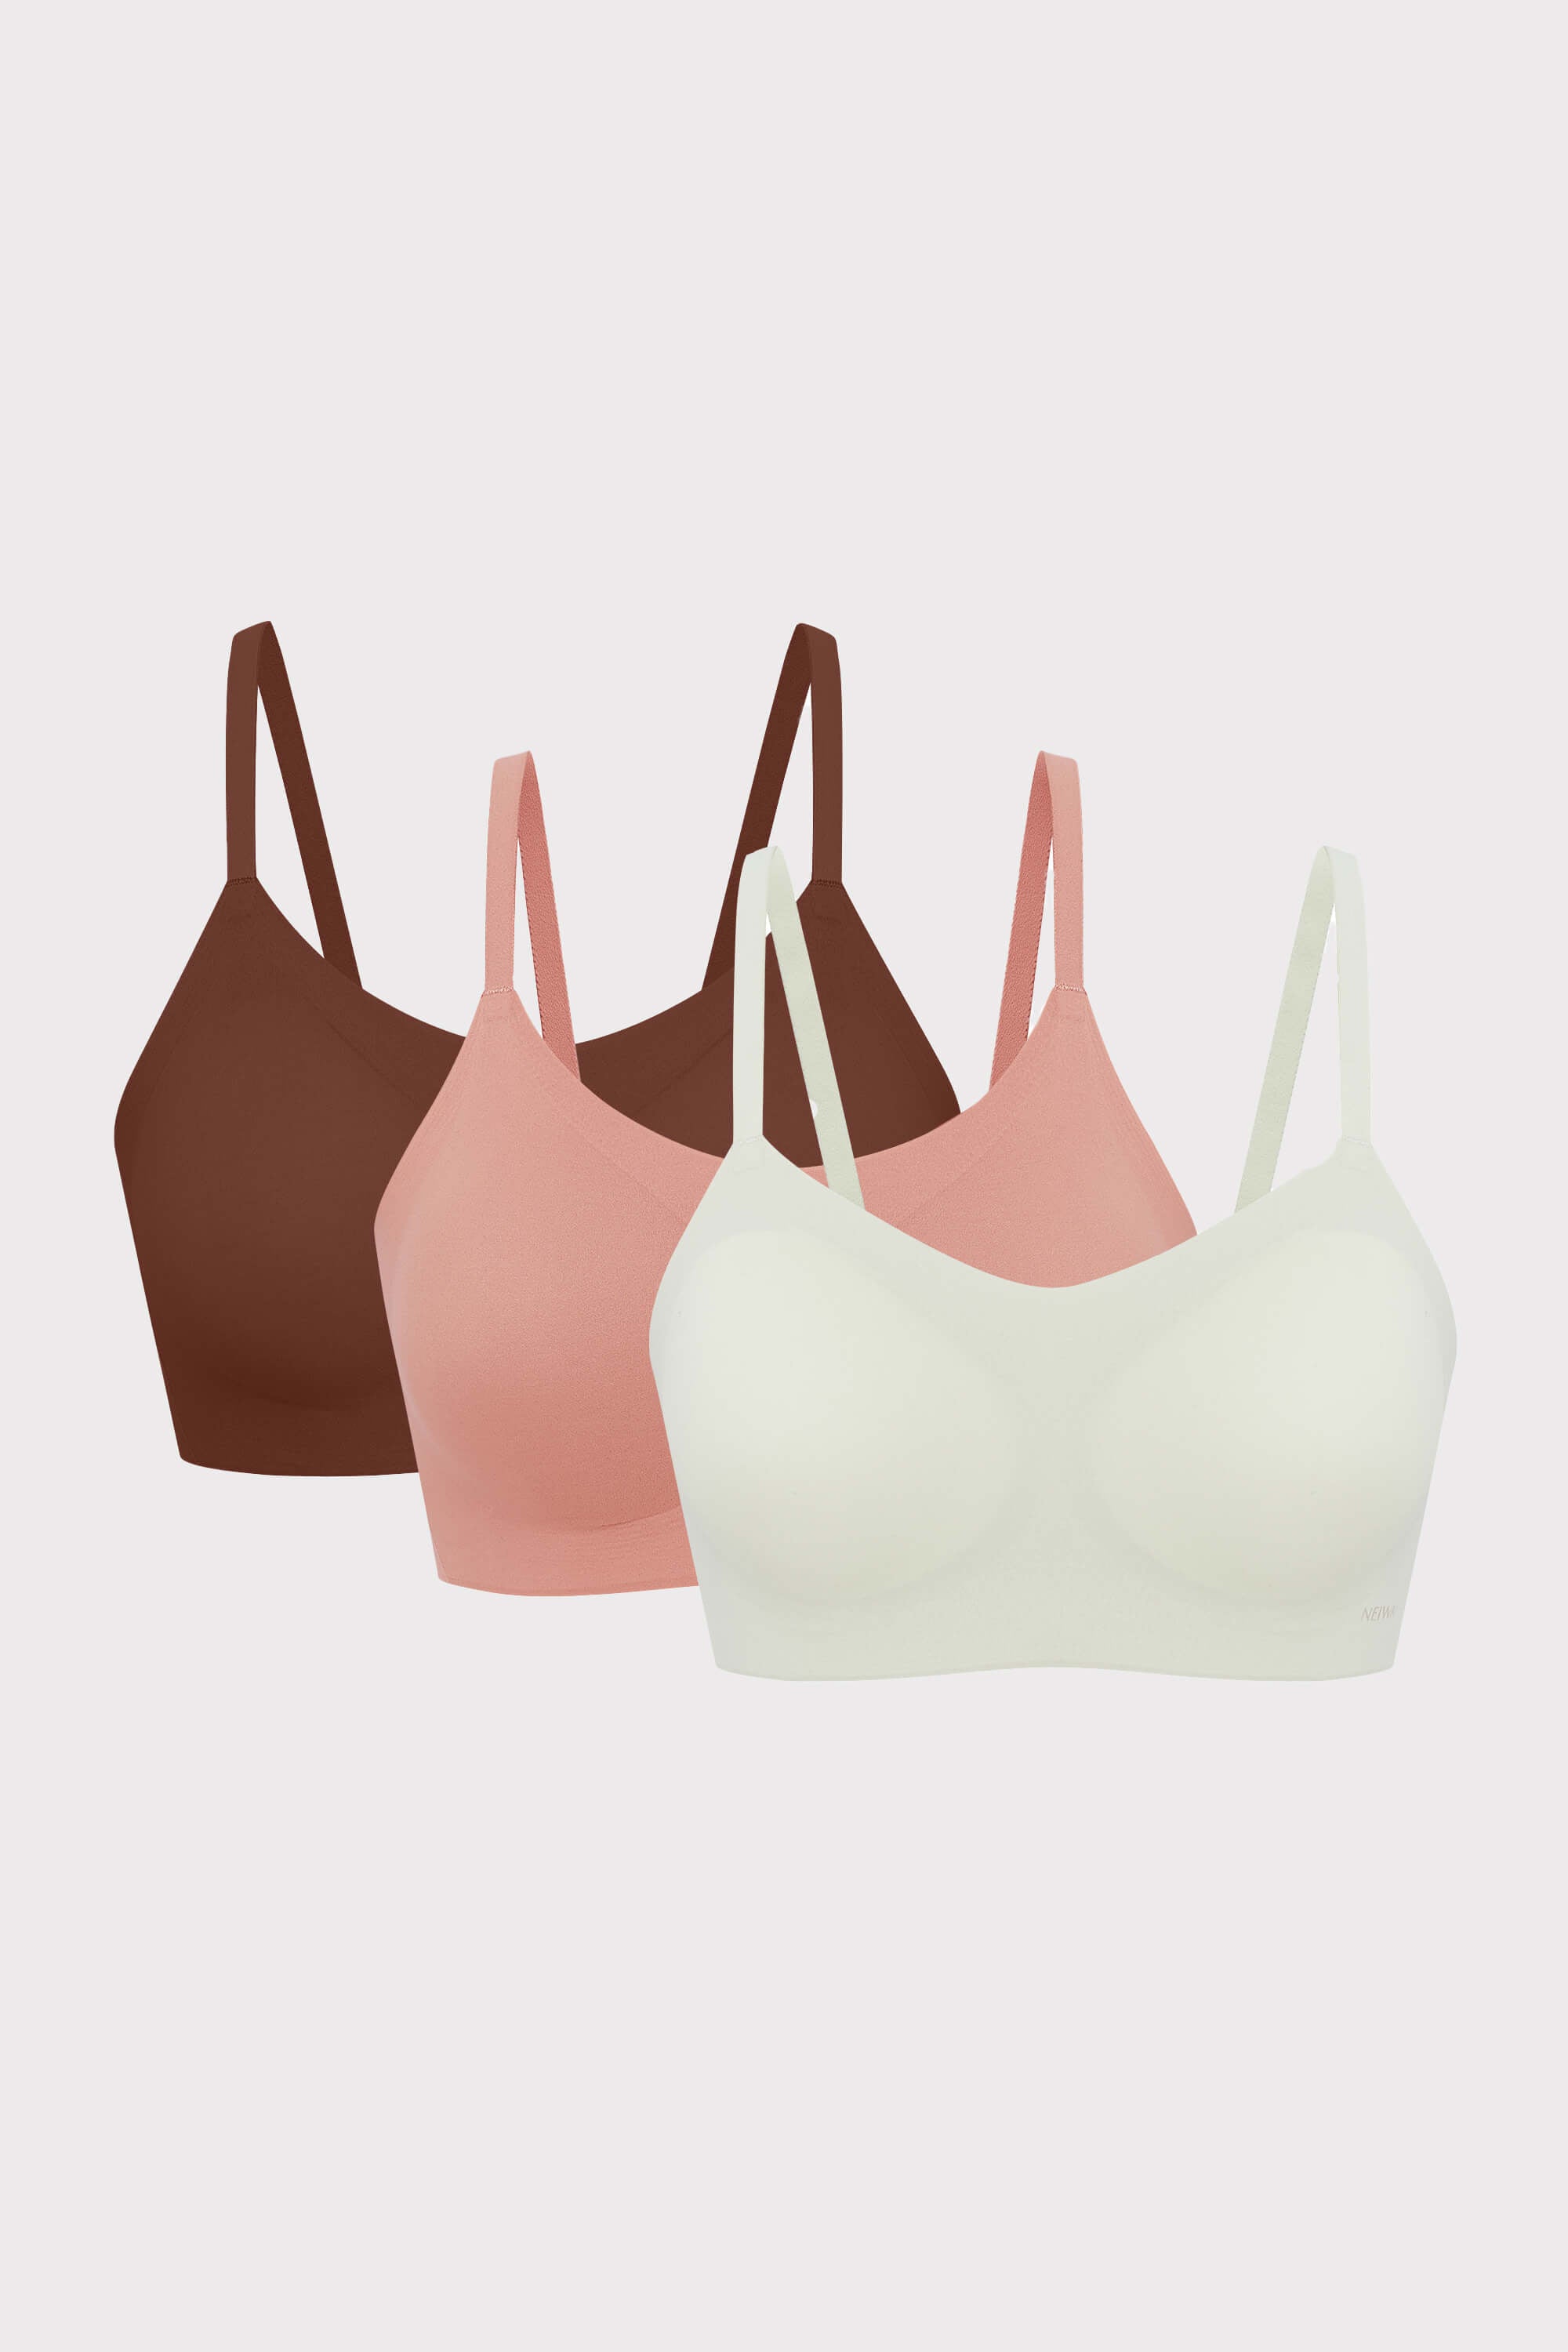 Buy INDOWEST Fashion Non Padded Seamless Cotton Bra, SMS Molded